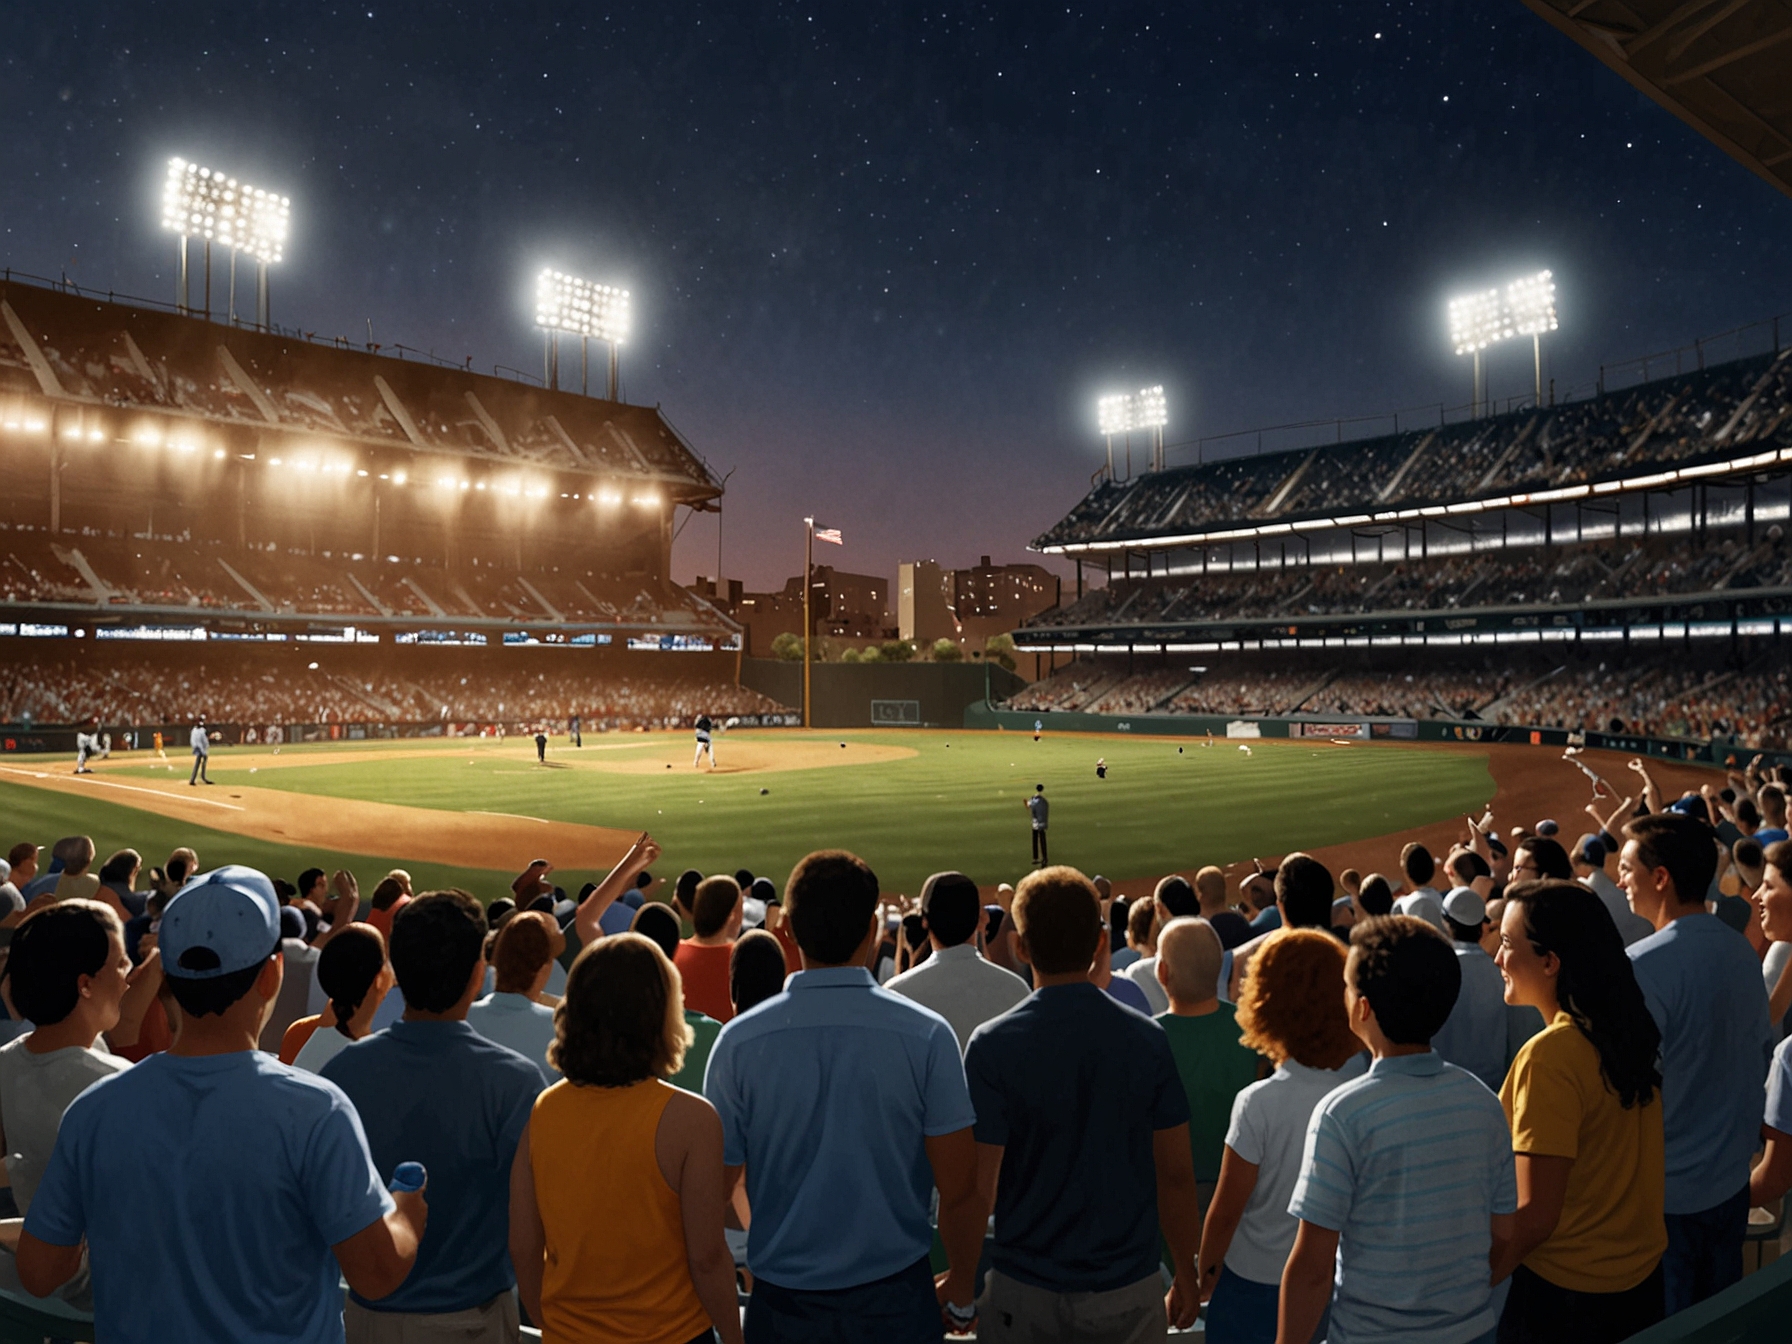 A joyful crowd at a previous Home Run Derby, capturing the excitement and anticipation of the event, with a spotlight left open for rising stars in Judge's absence for the upcoming 2024 contest.